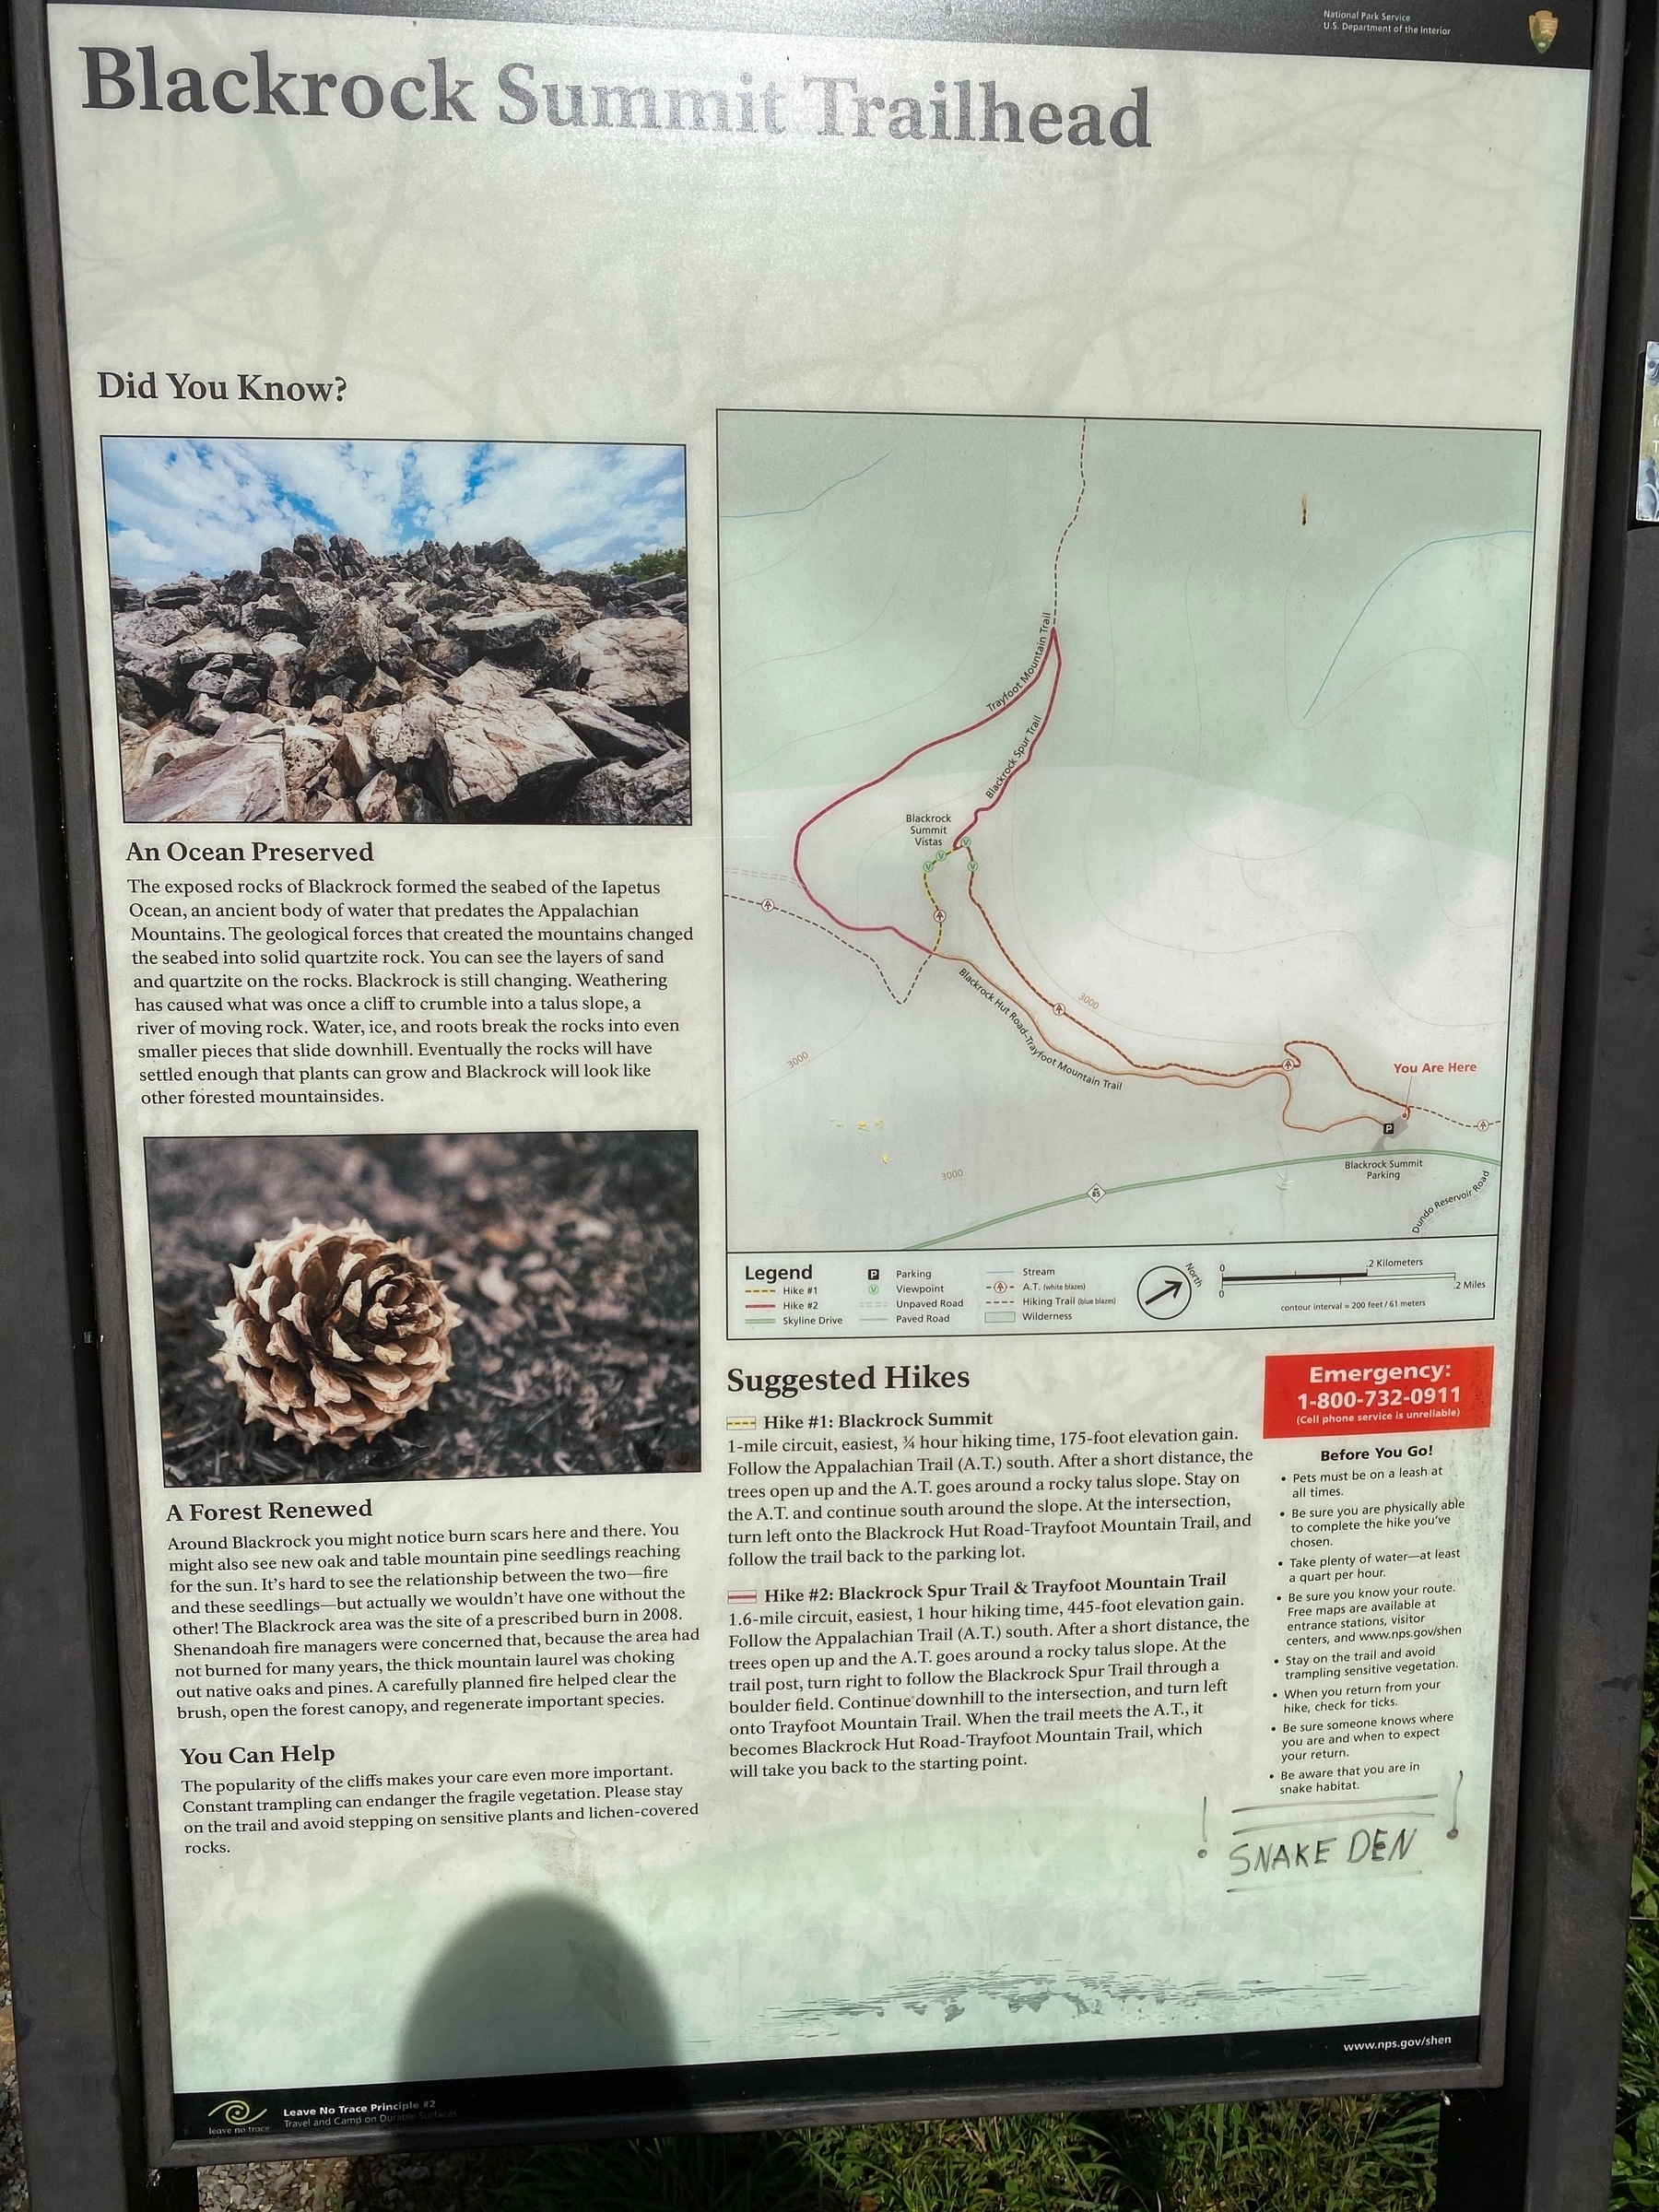 The informational signage at the trailhead